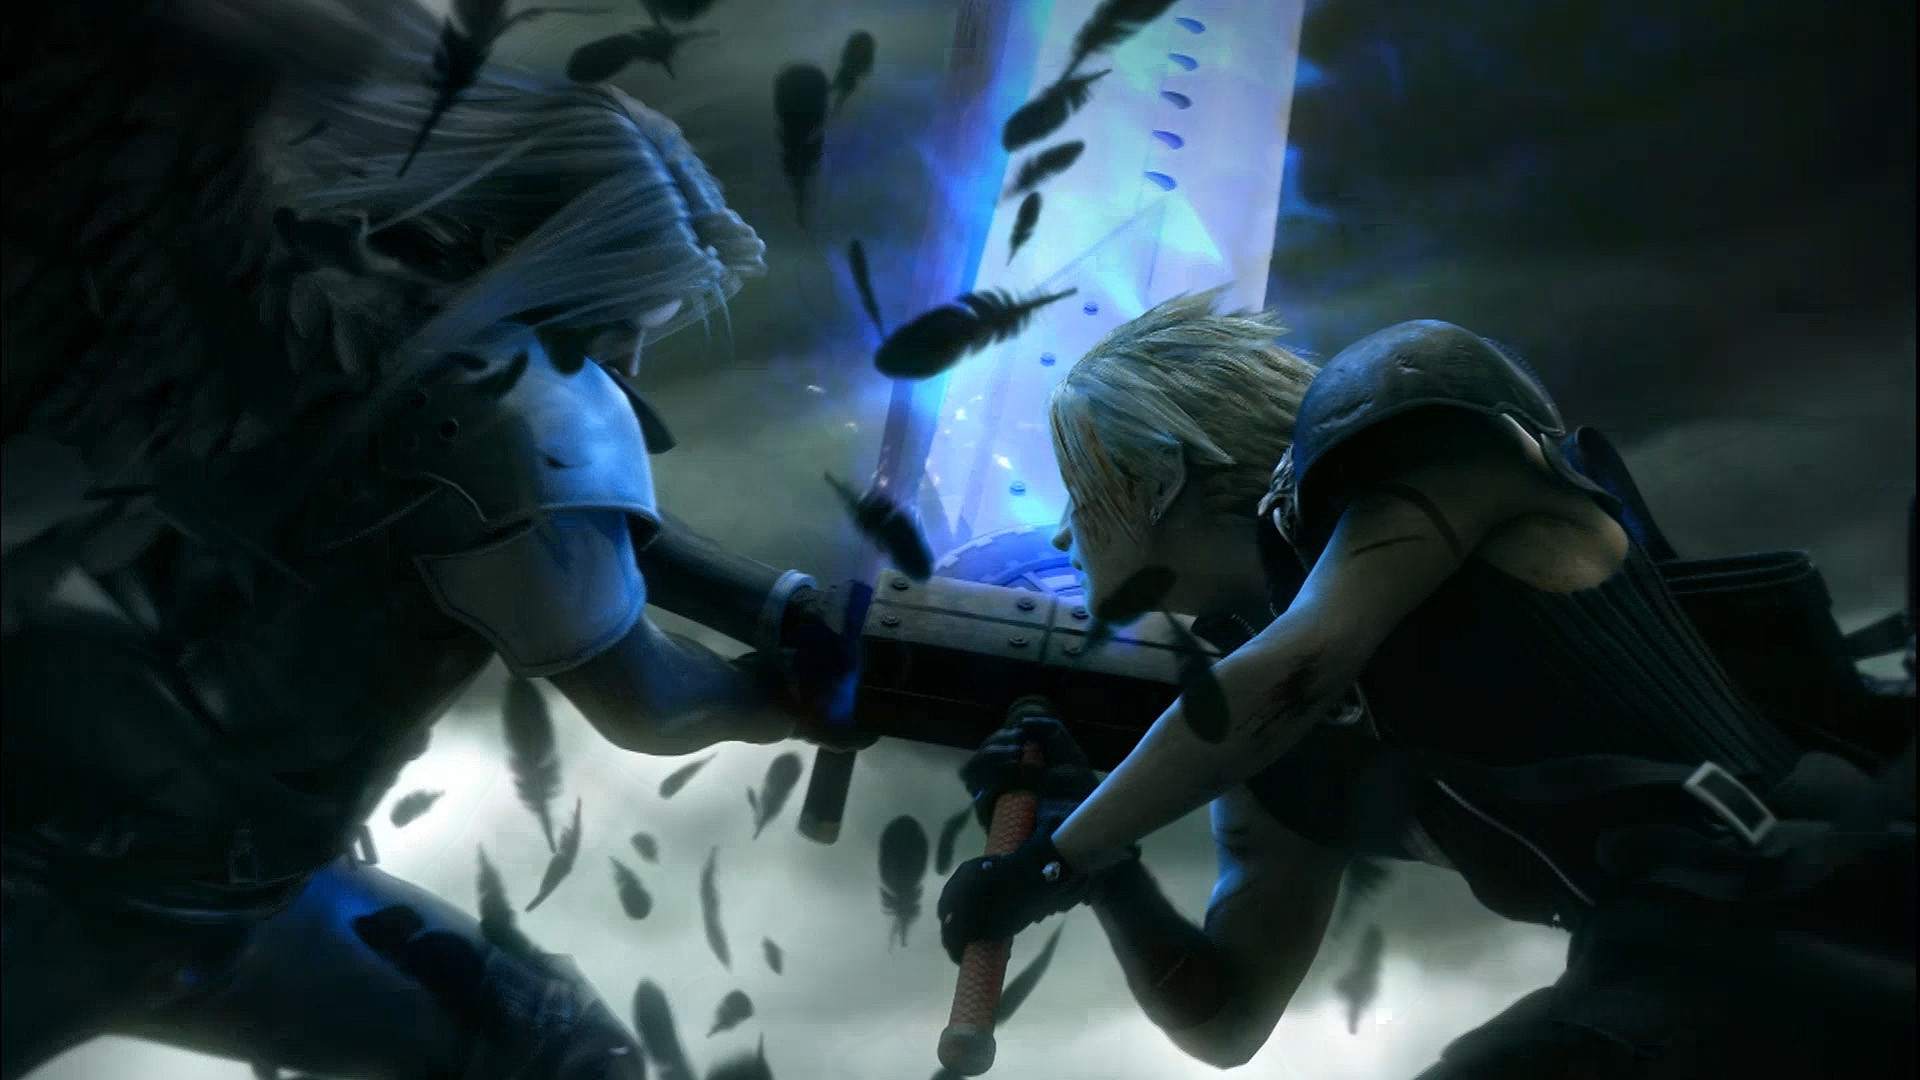 Final Fantasy – Cloud And Sephiroth